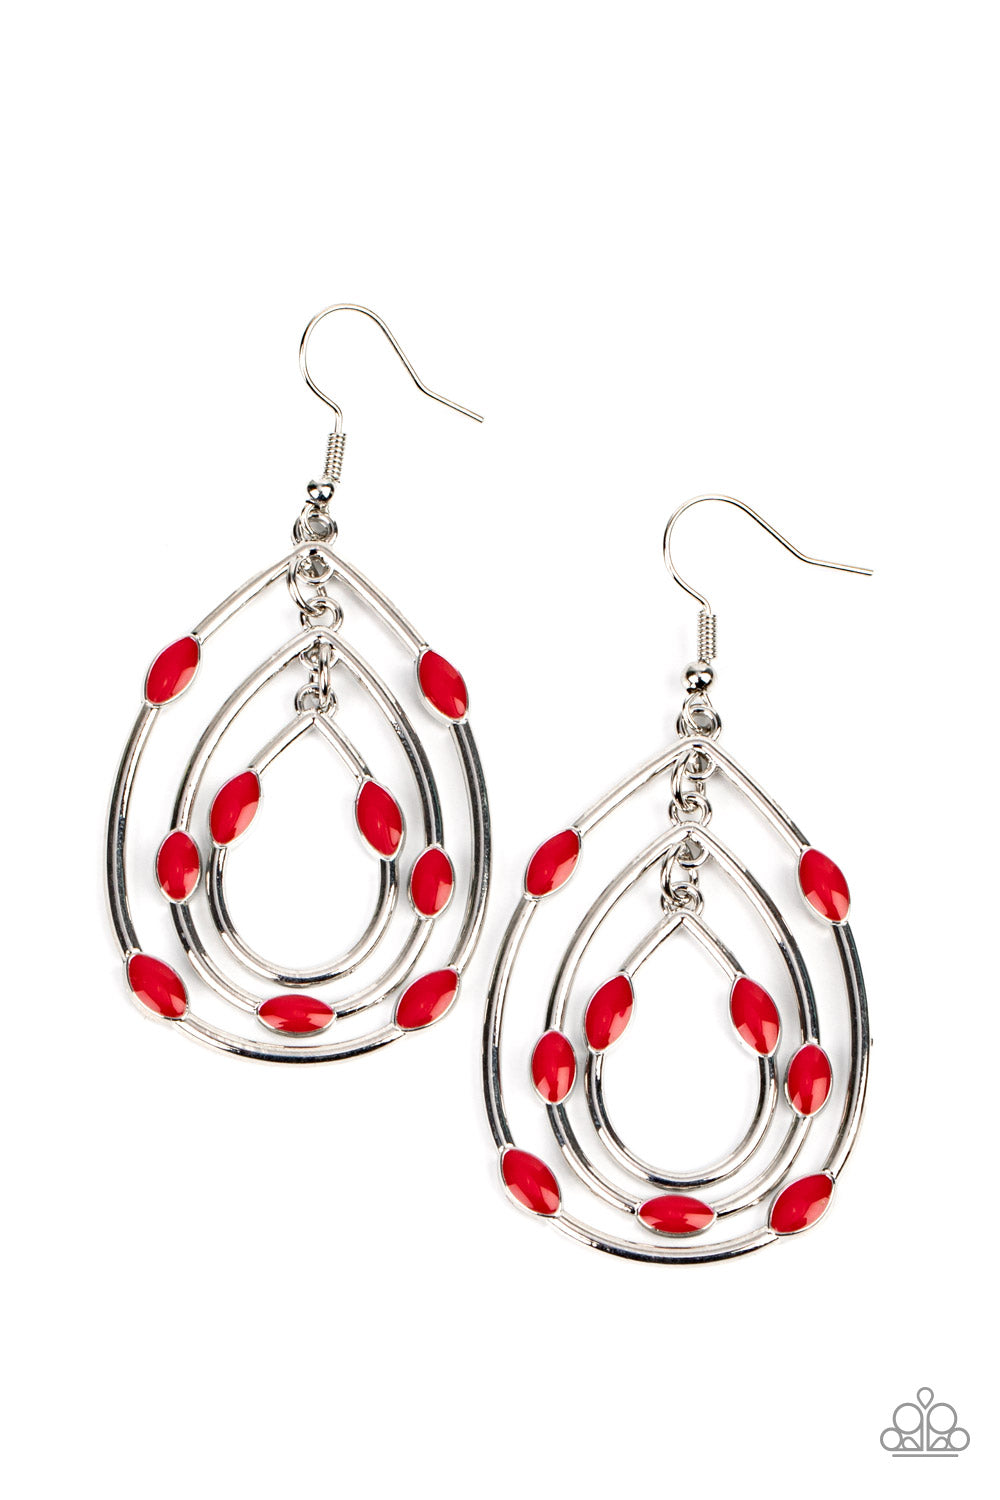 Rippling Rapport - Red Accent Earrings - Paparazzi Accessories